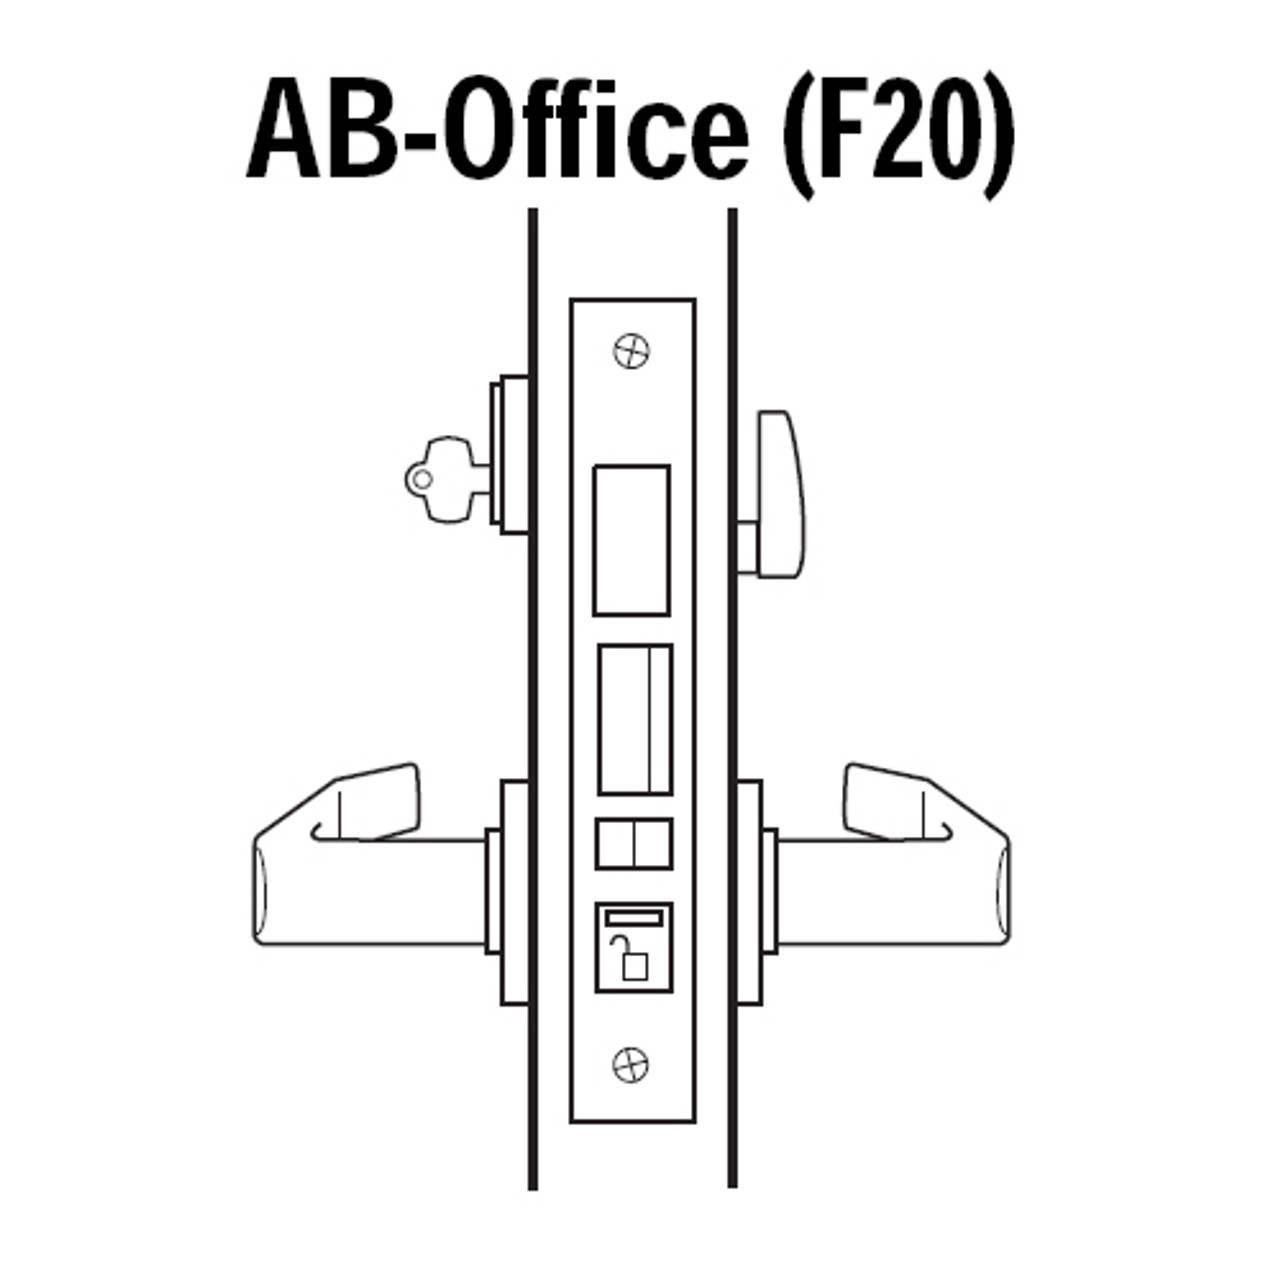 45H7AB3R619VIT Best 45H Series Office with Deadbolt Heavy Duty Mortise Lever Lock with Solid Tube Return Style and Visual Thumbturn Indicato in Satin Nickel